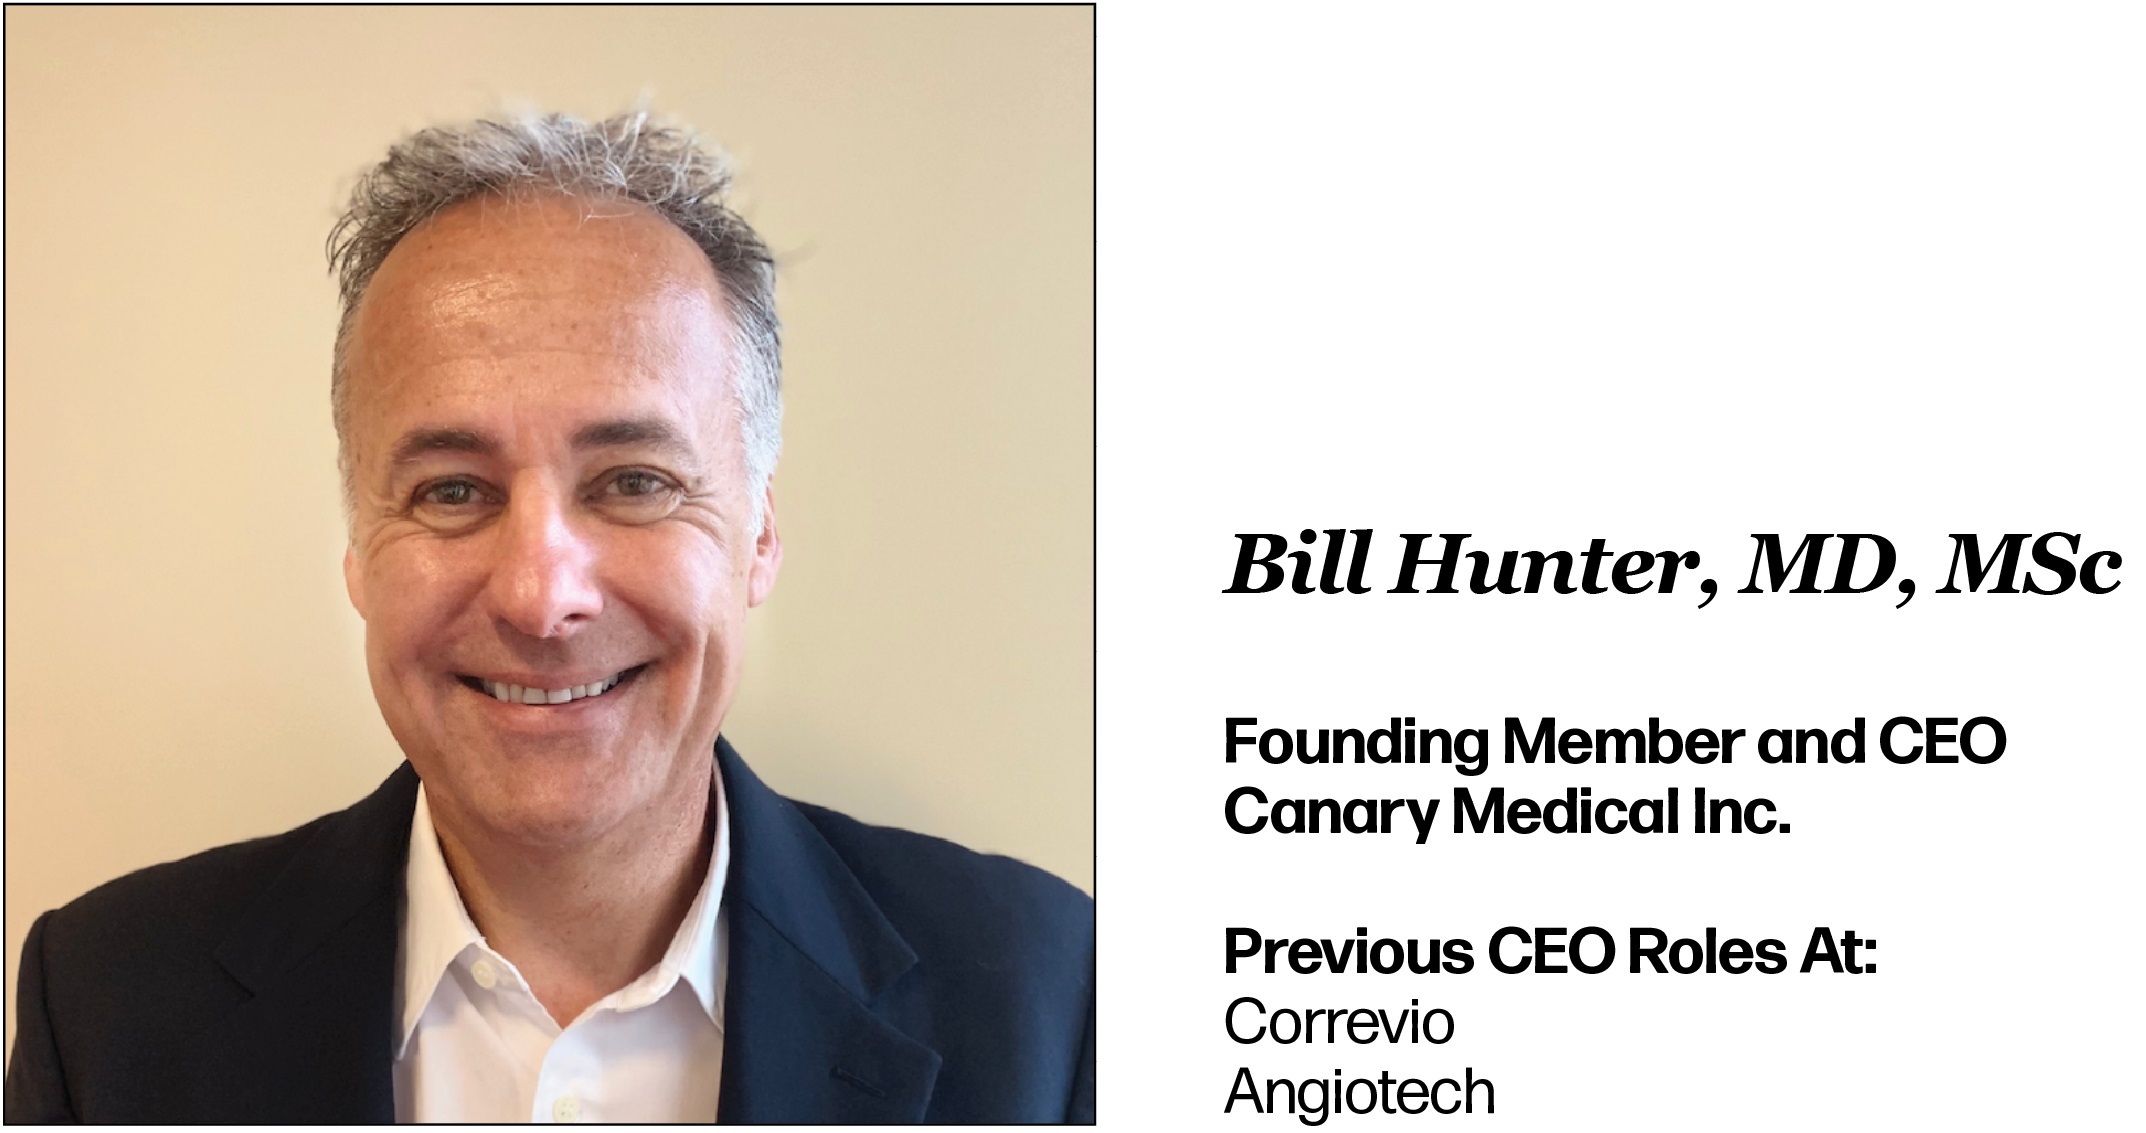 Headshot of Bill Hunter, MD, MSc. Lists his current role as Founding Member and CEO of Canary Medical Inc.. His past CEO roles were at Correvio and Angiotech. 